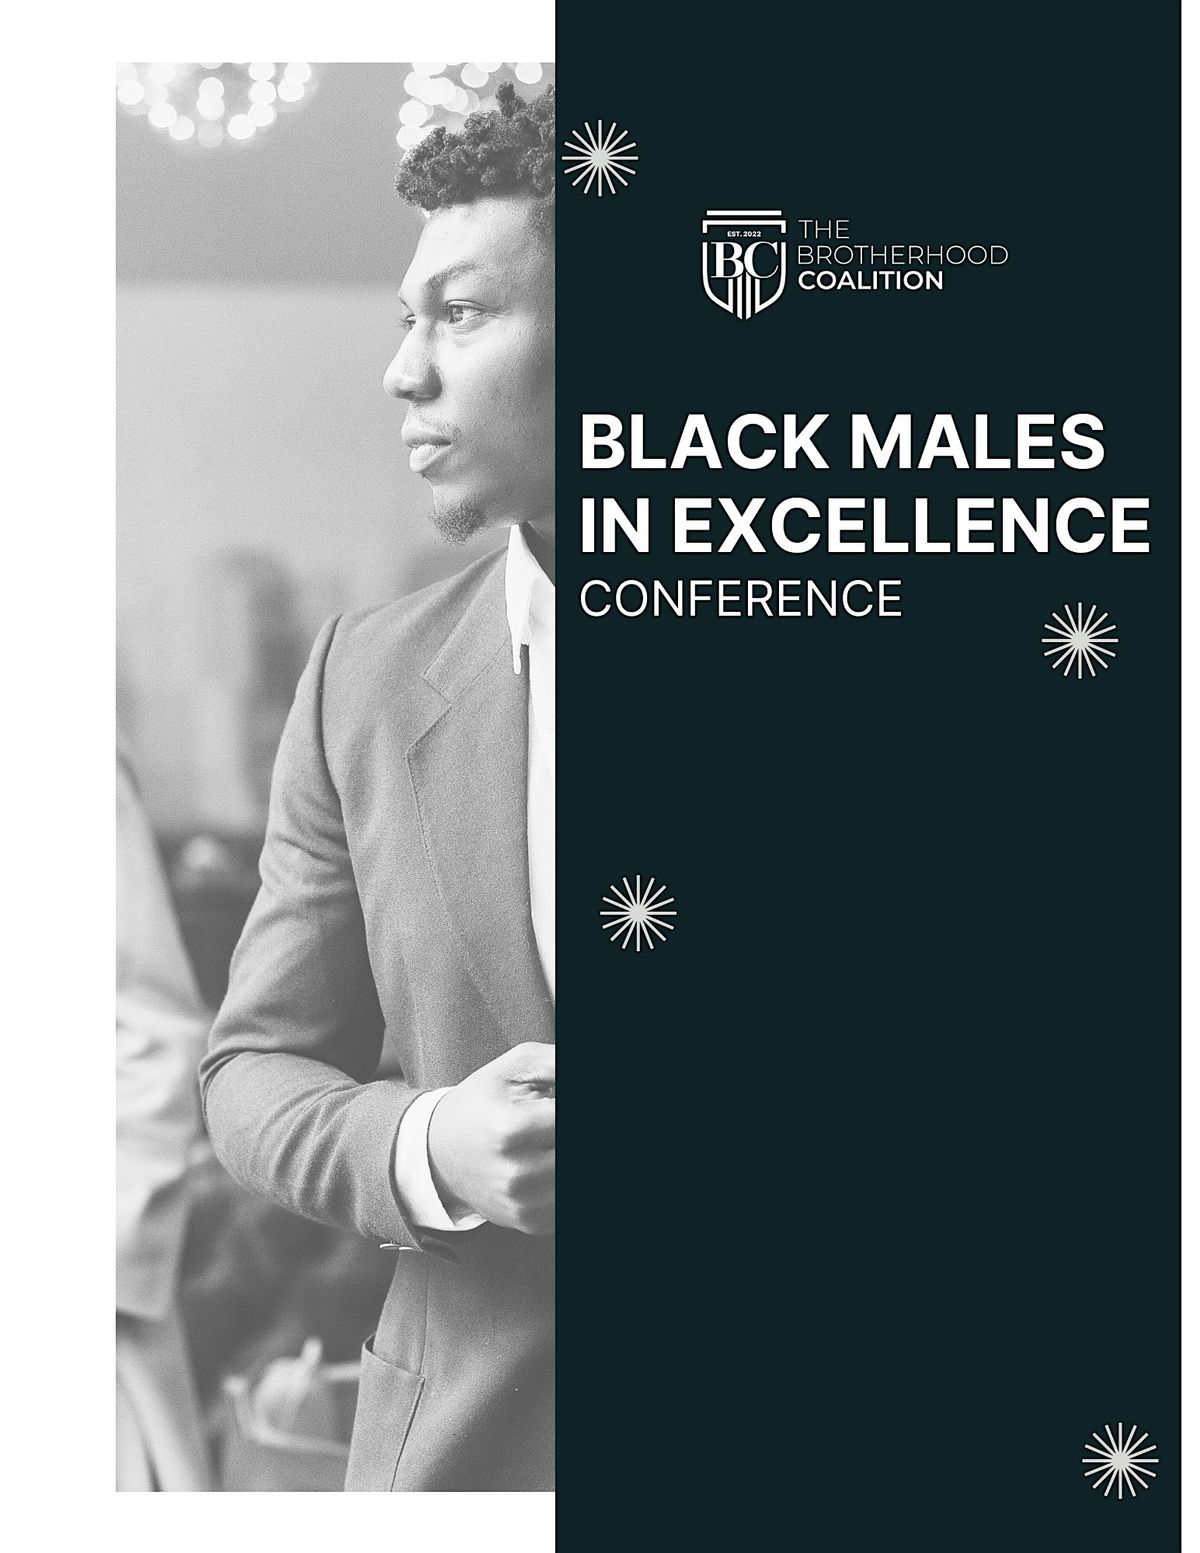 Black Males in Excellence Conference